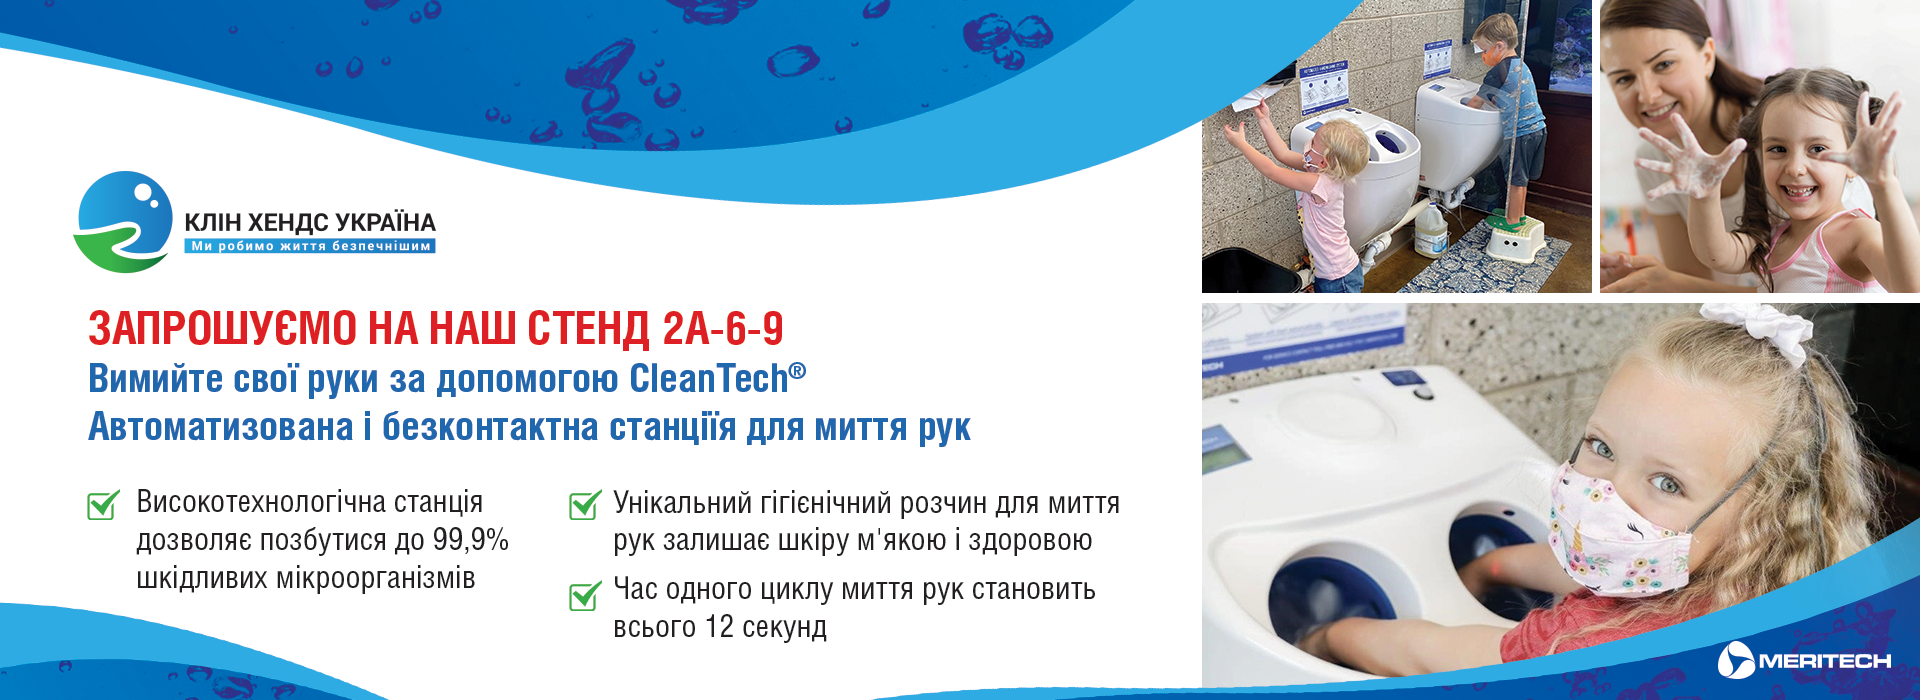 We Invite You to Visit our Stand at the Exhibition CleanExpo Ukraine